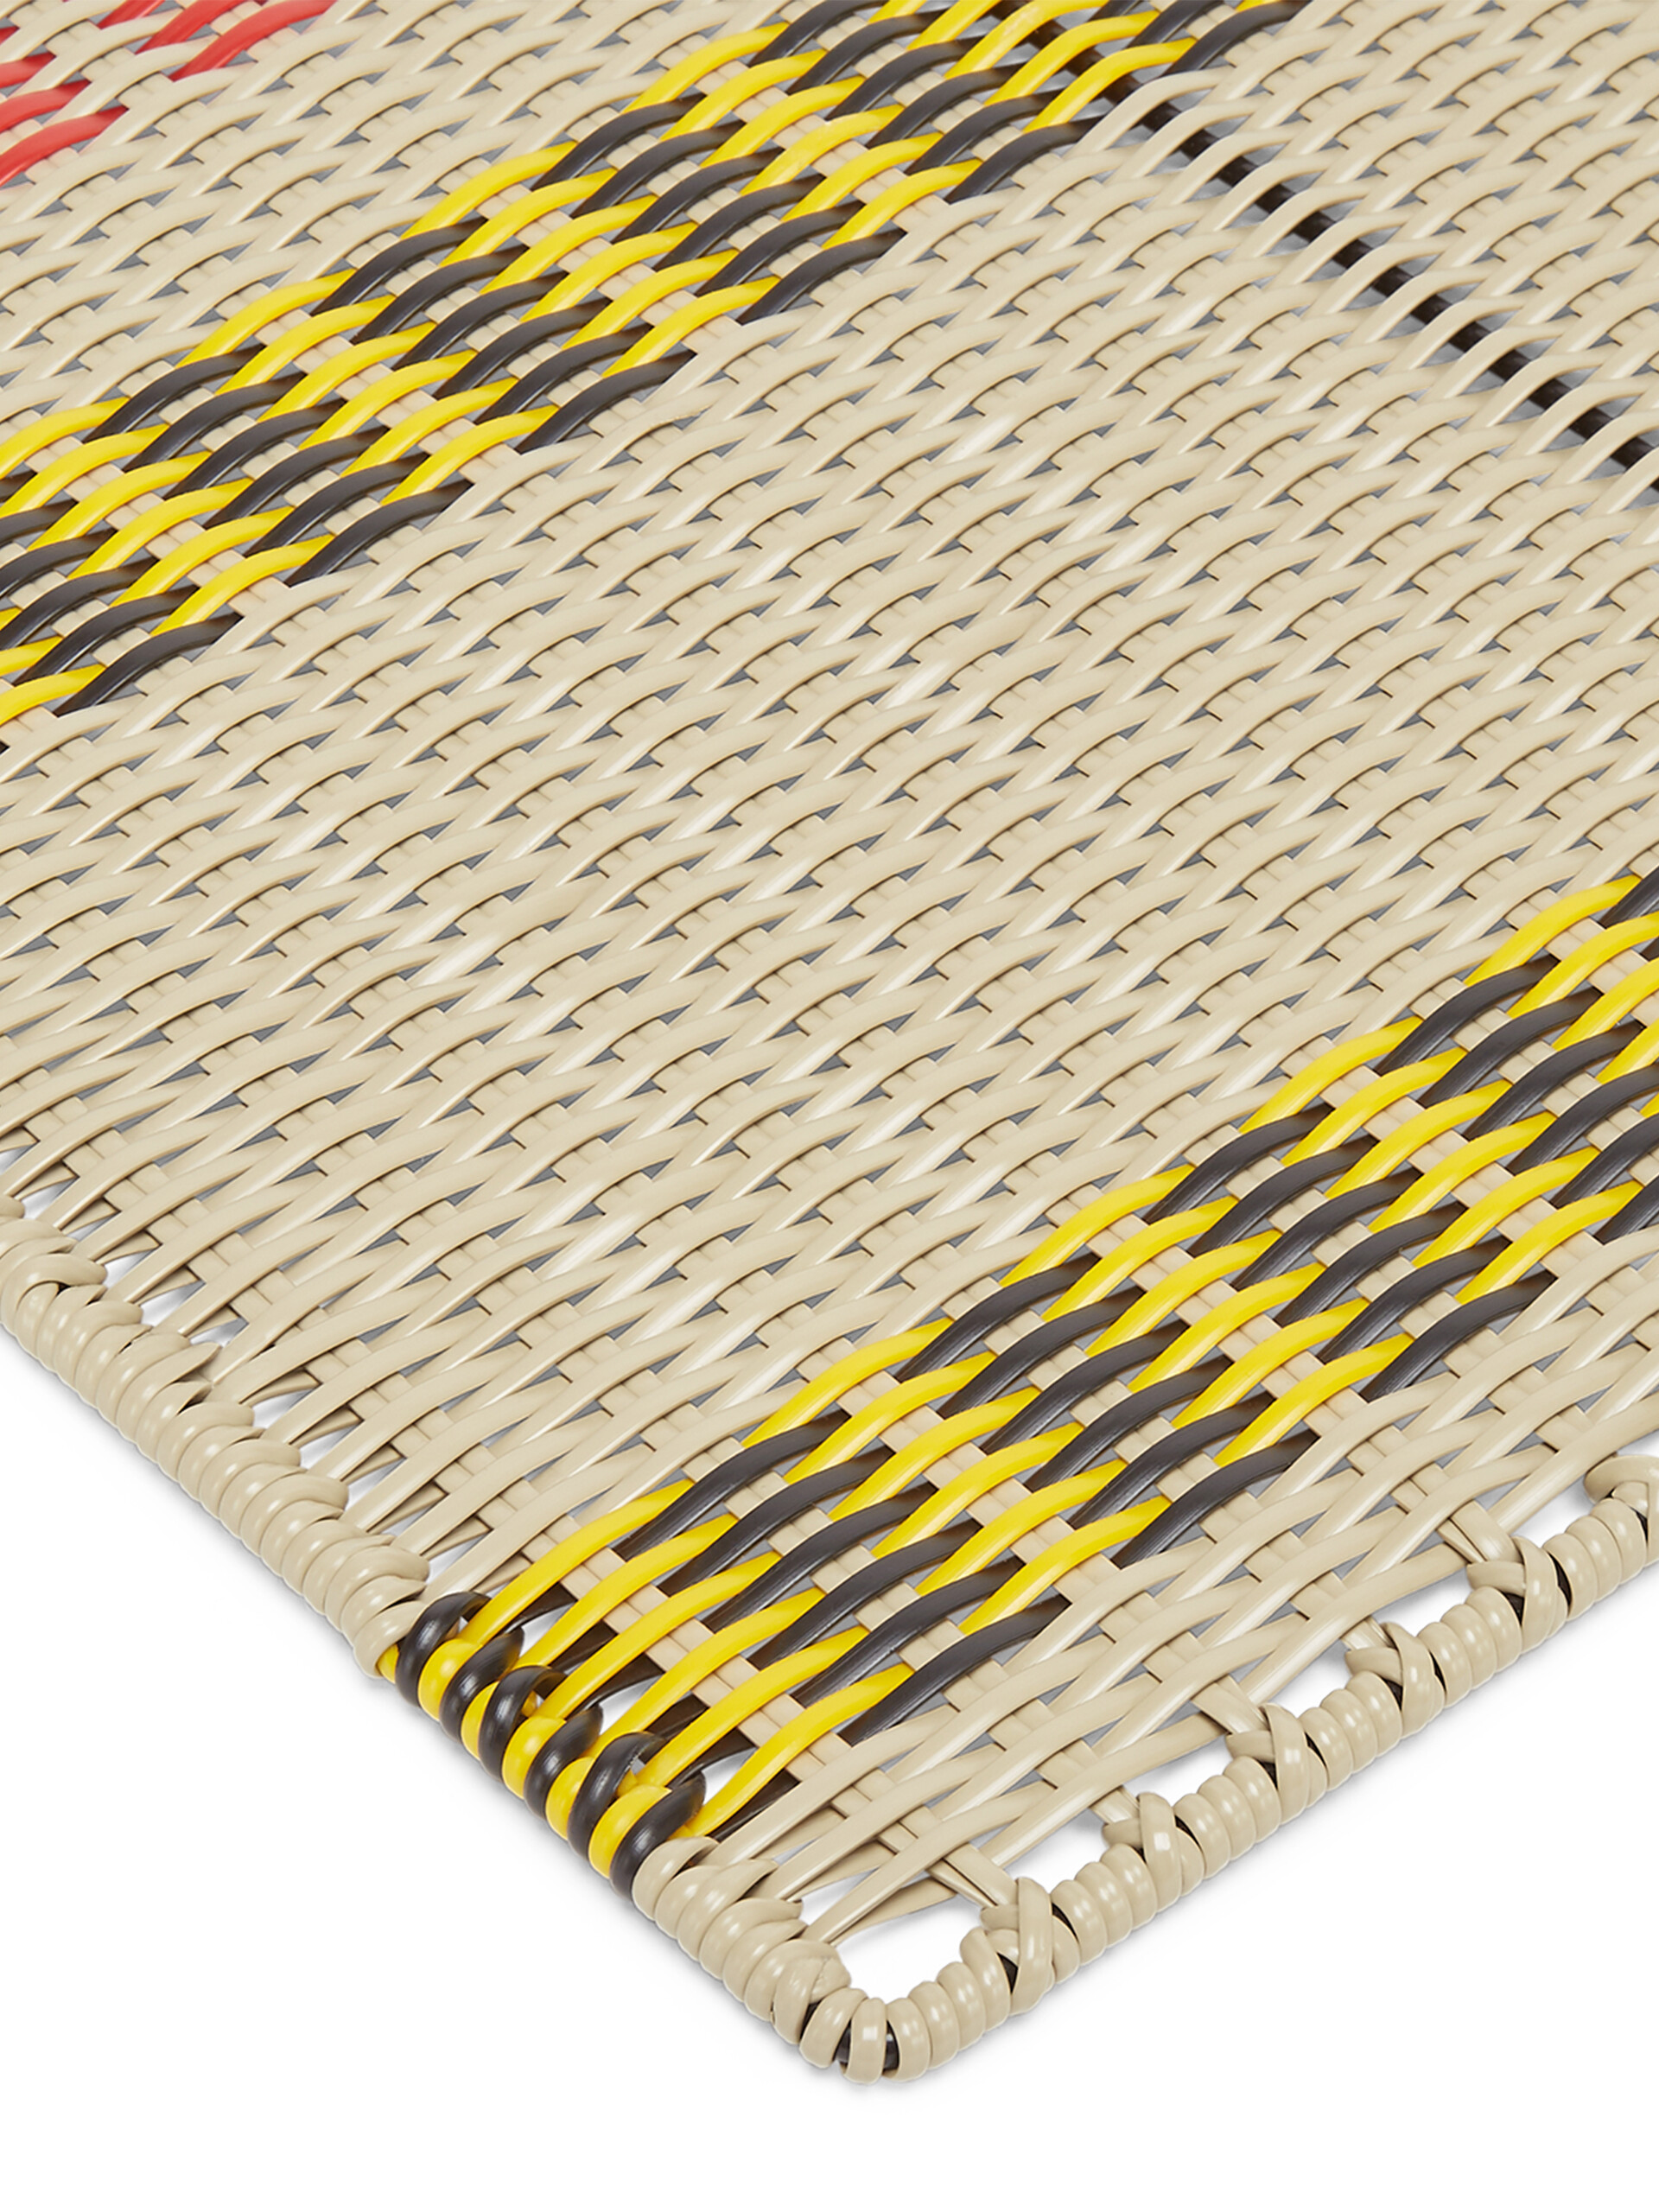 MARNI MARKET rectangular placemat with multicolor striped motif - Accessories - Image 3